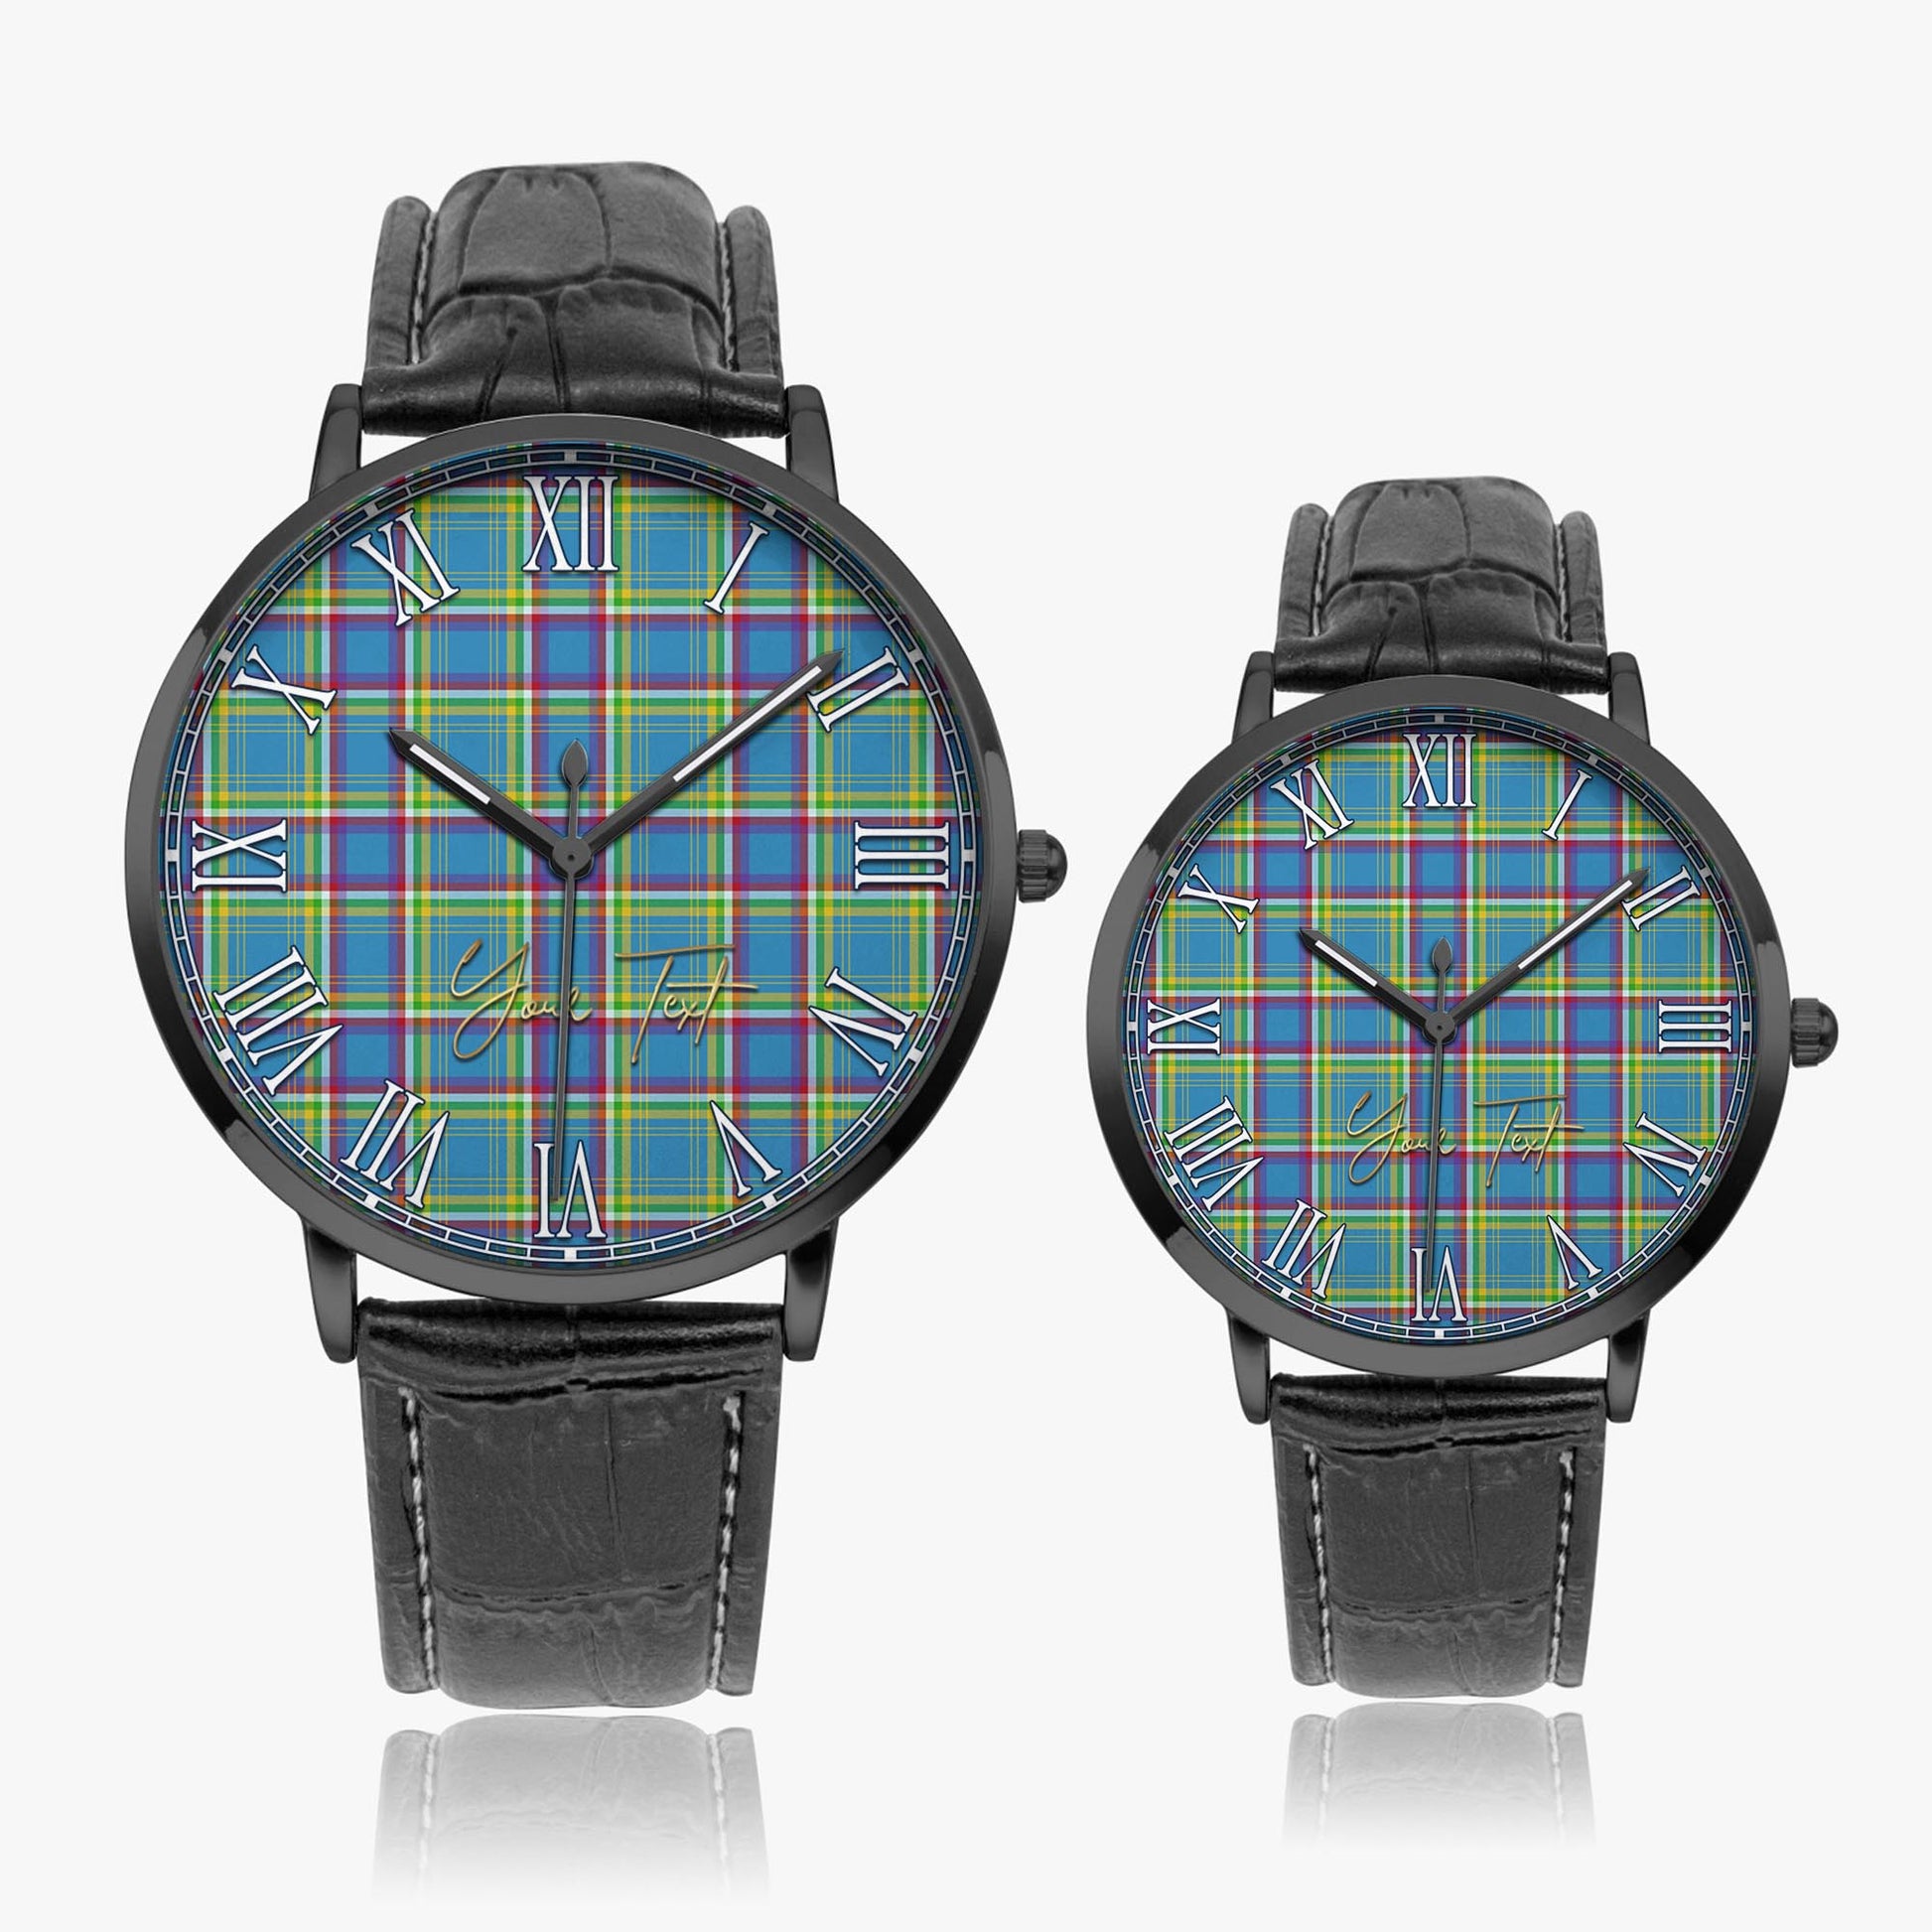 Yukon Territory Canada Tartan Personalized Your Text Leather Trap Quartz Watch Ultra Thin Black Case With Black Leather Strap - Tartanvibesclothing Shop